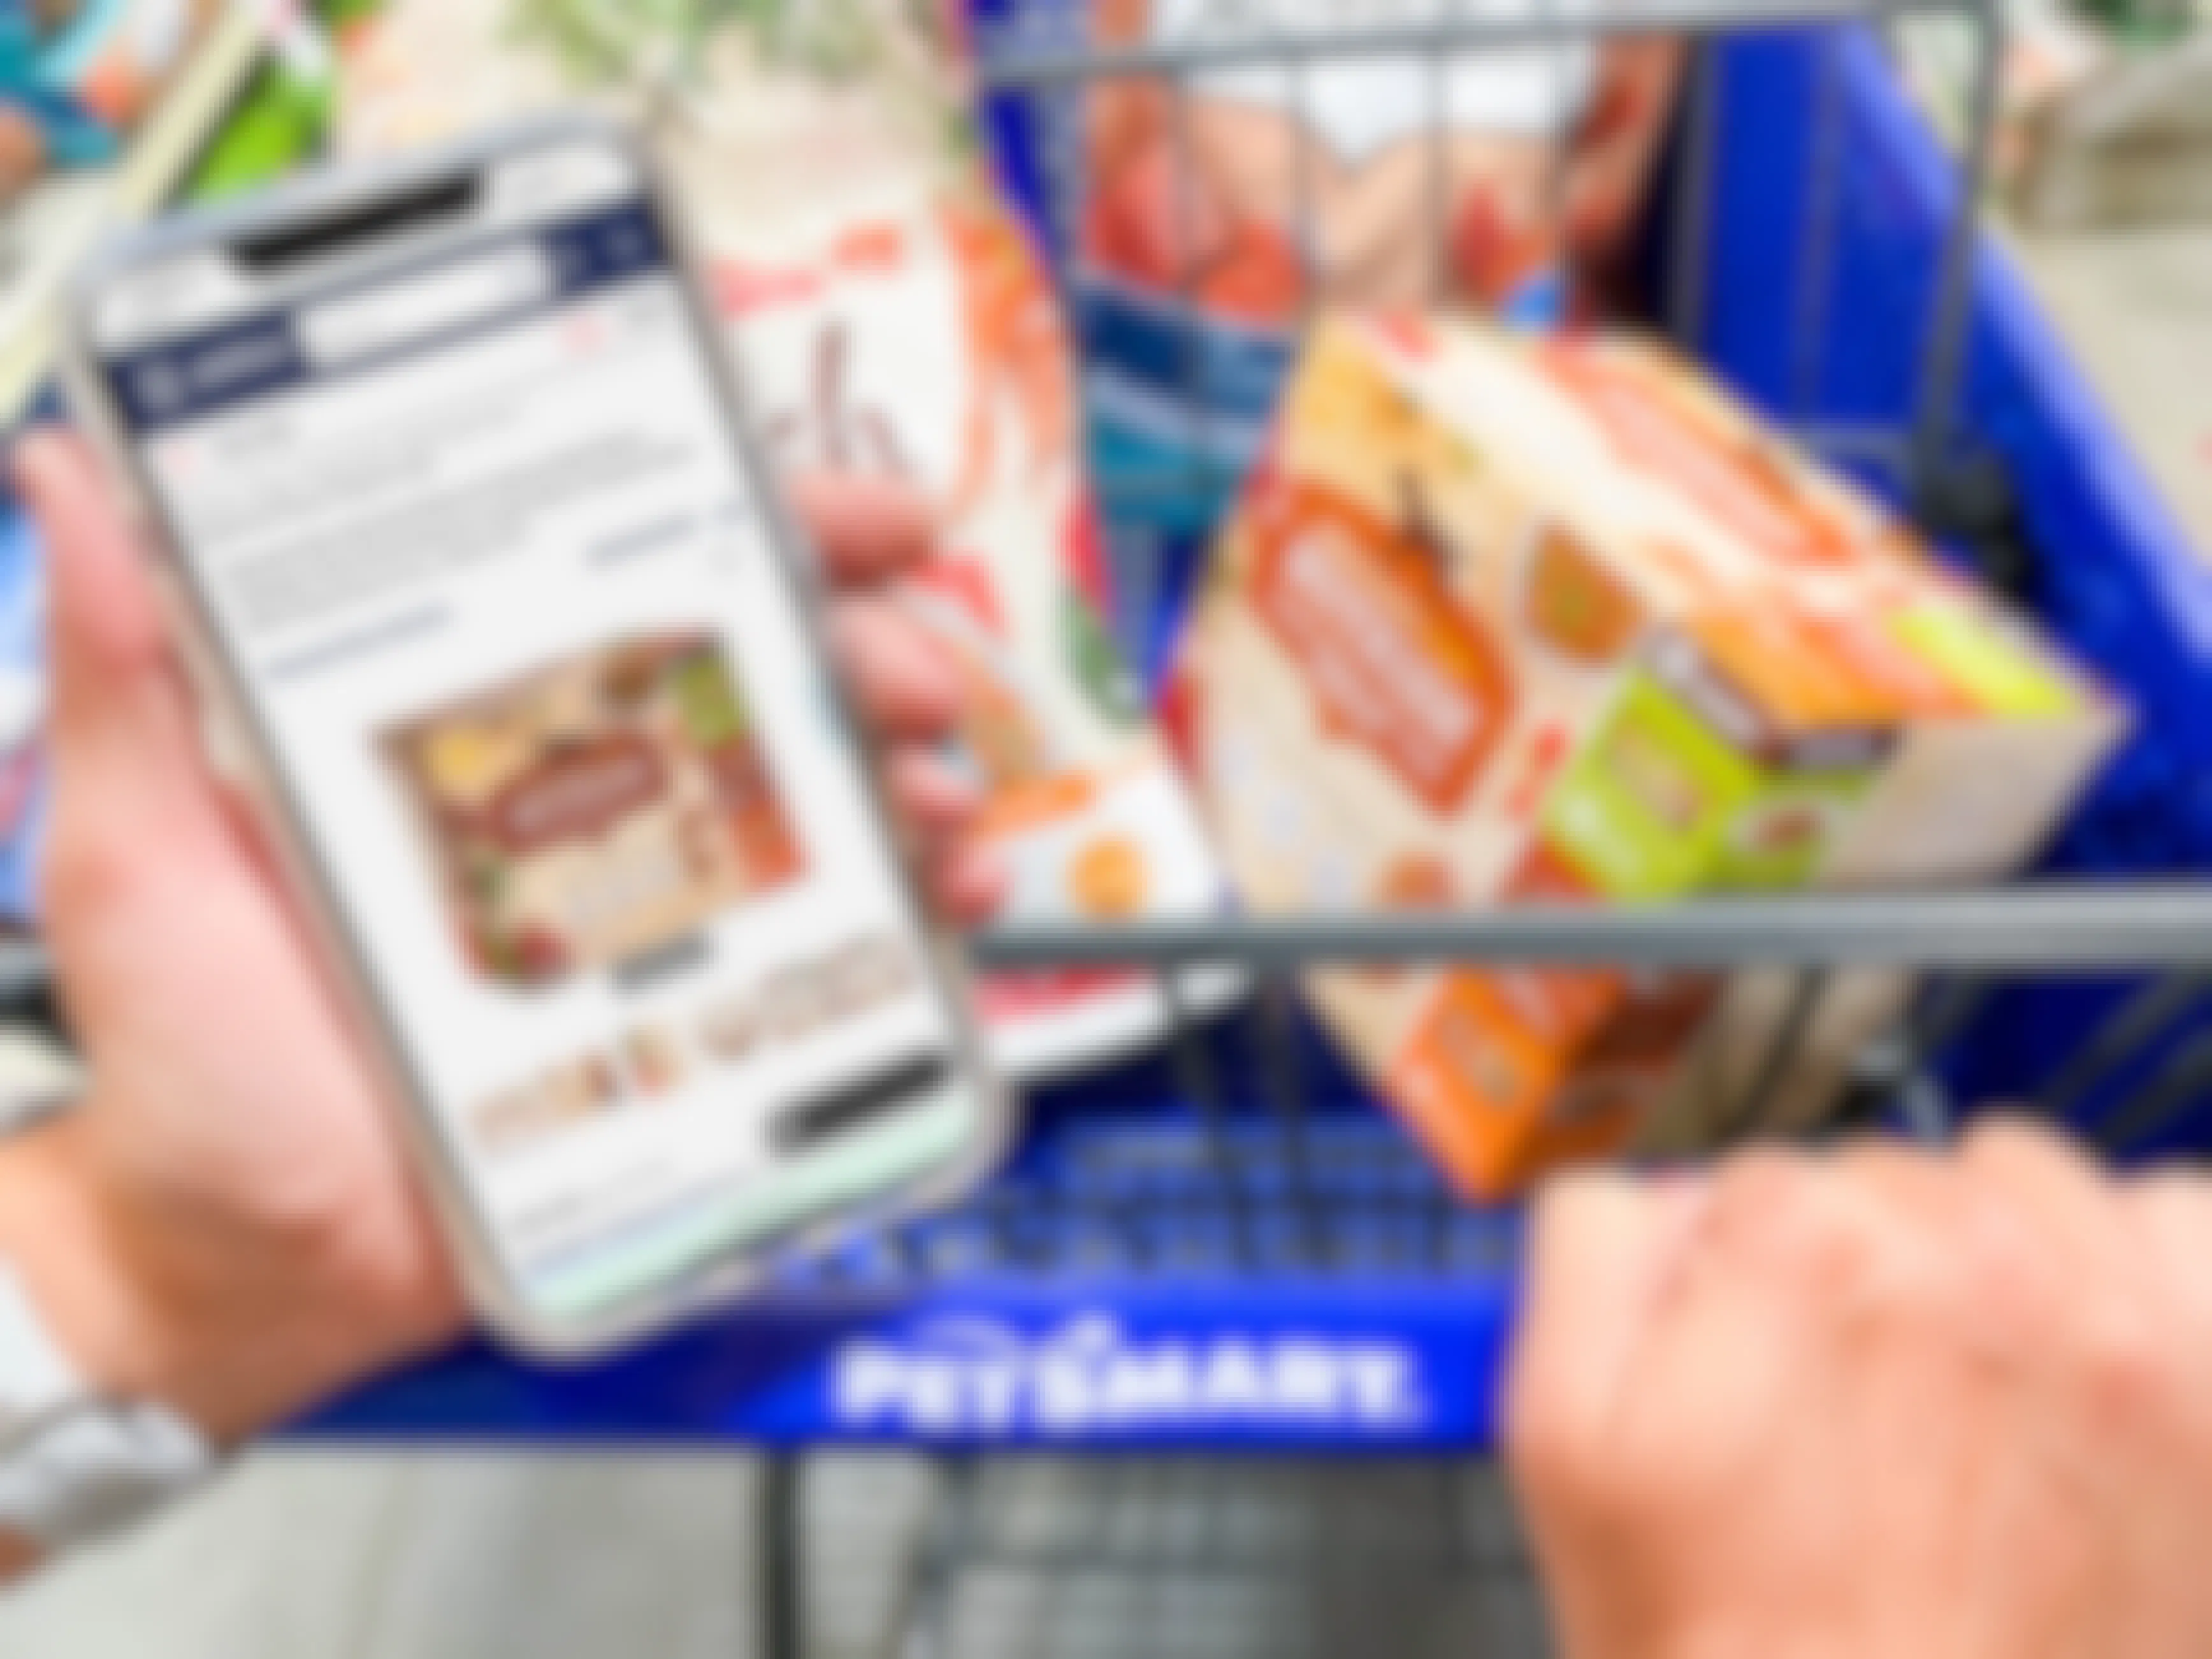 A person's hands, one holding a cellphone with the Petco website open to a product, and the other hand pushing a PetSmart shopping cart with that product in the basket.